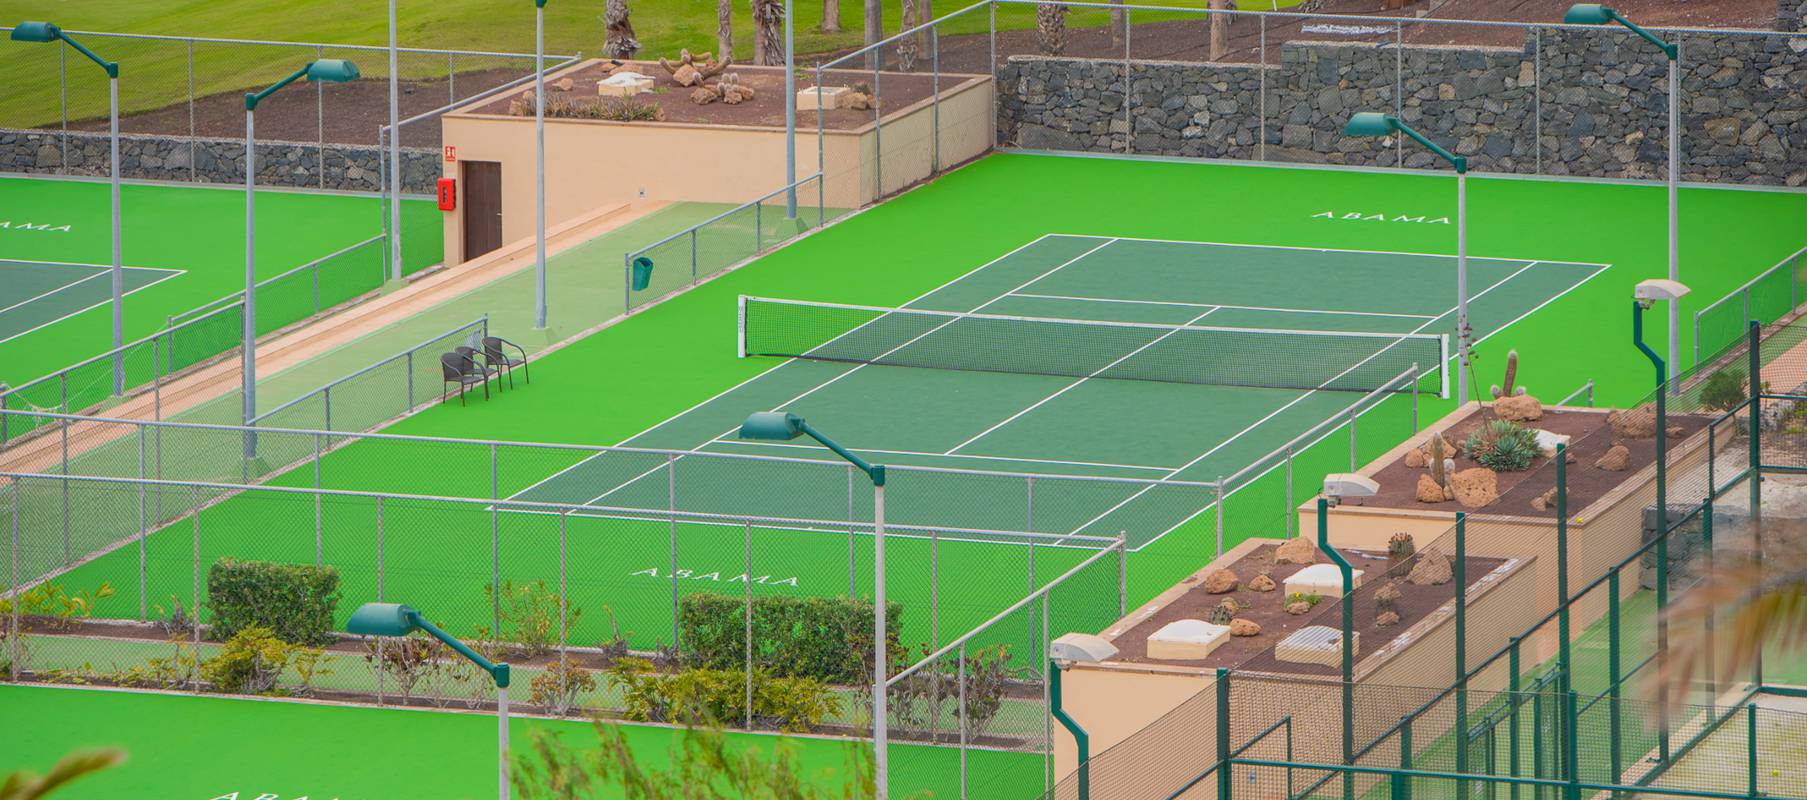 Play tennis and paddle tennis with the Atlantic Ocean as judge Abama Hotels